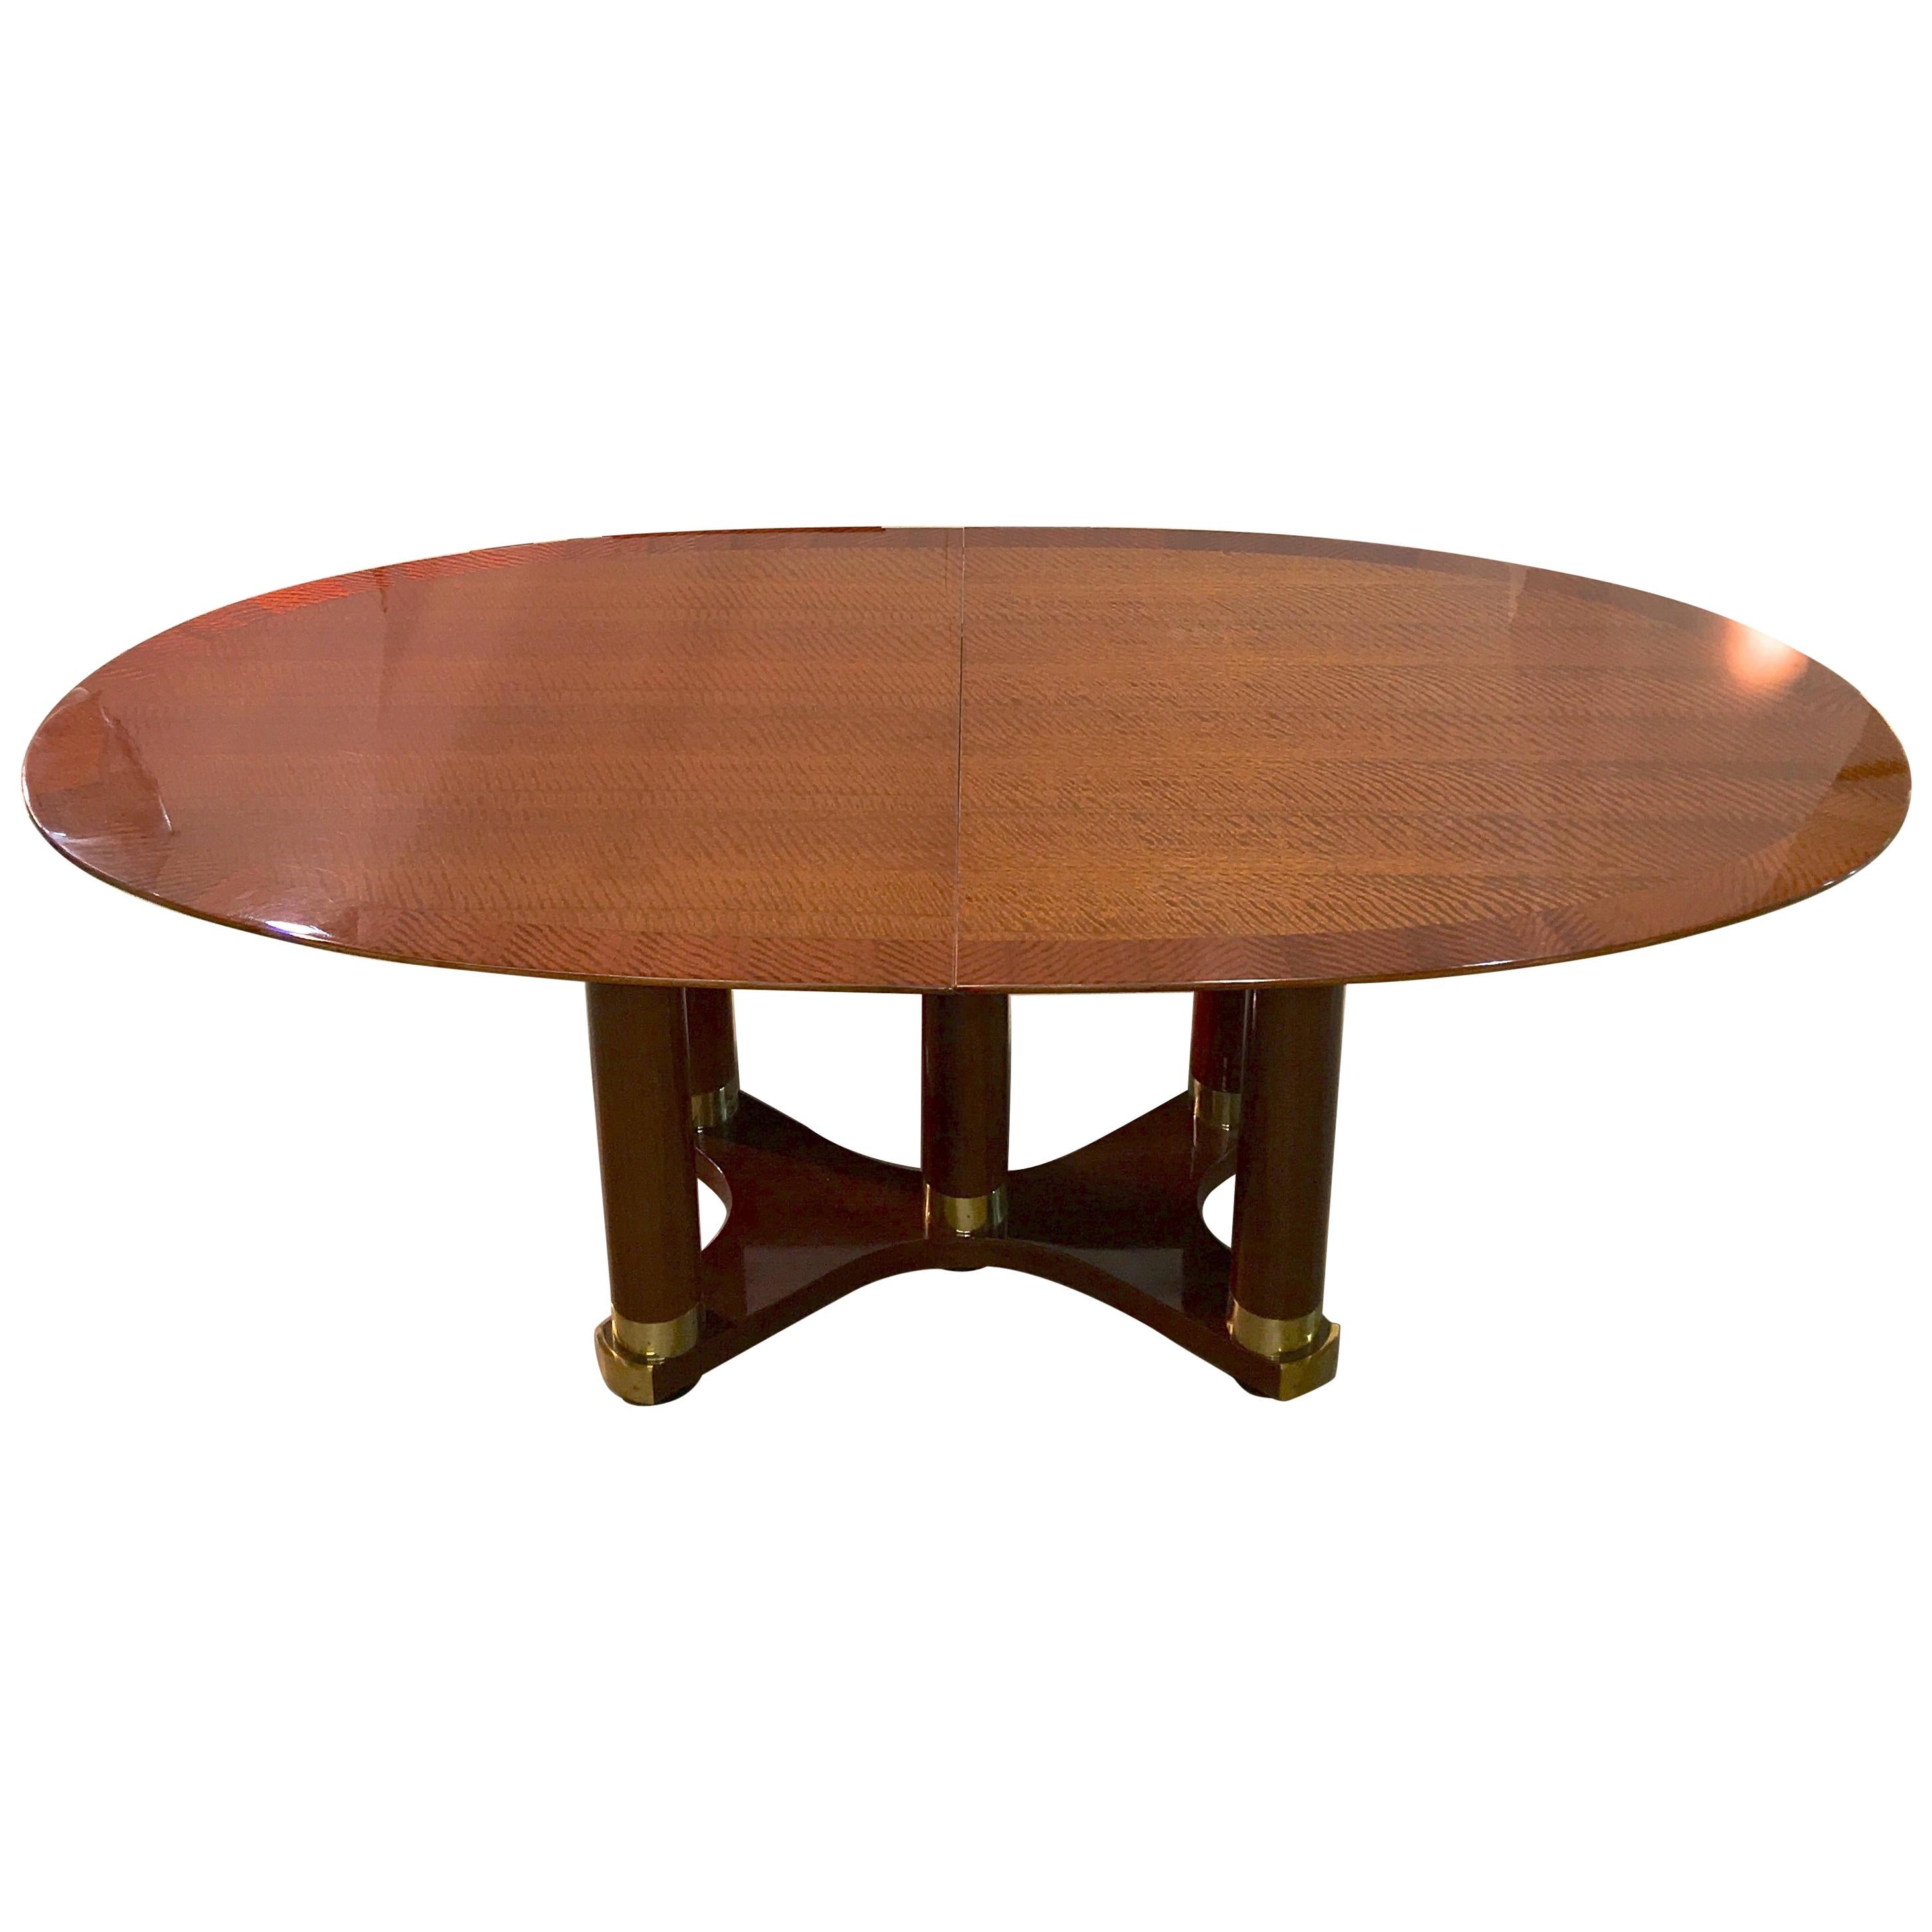 Henredon Triomphe Oval Dining Table (SATURDAY SALE)